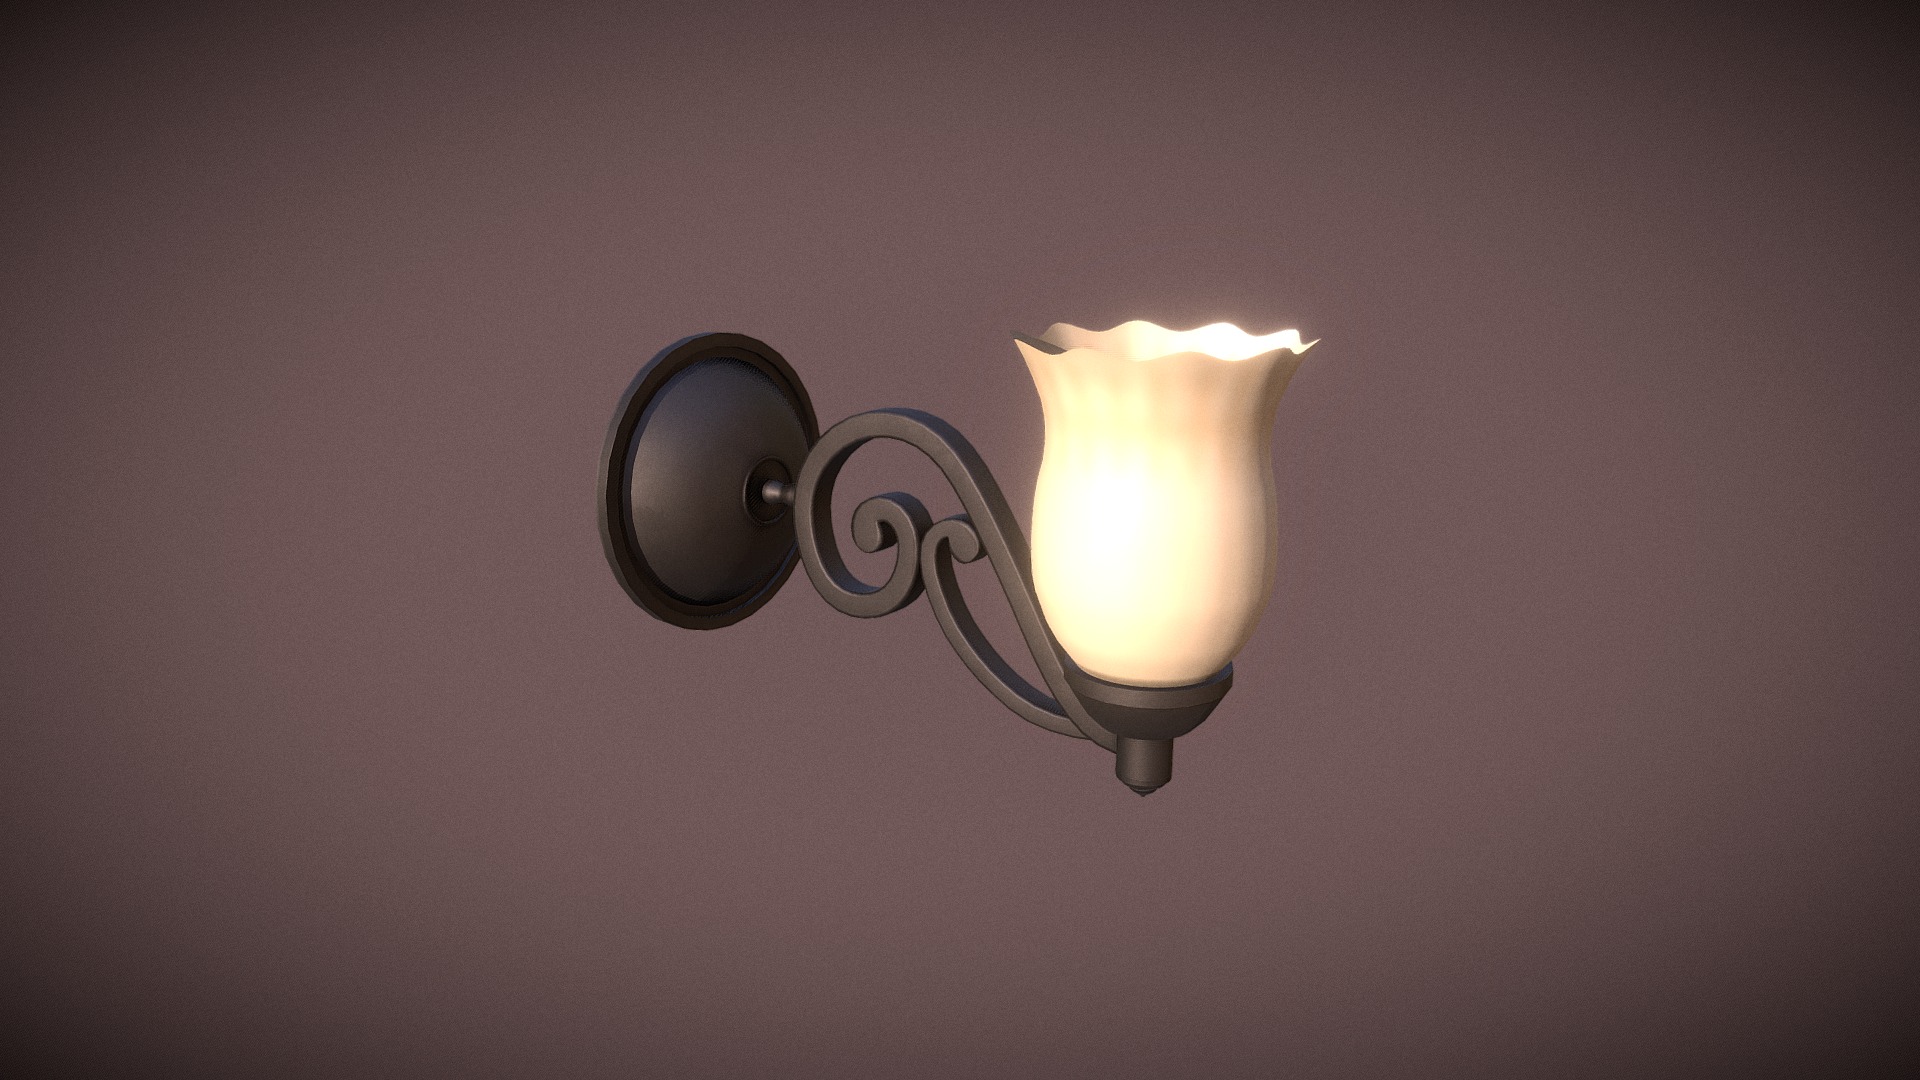 3D model Wall Lamp Ornament - This is a 3D model of the Wall Lamp Ornament. The 3D model is about a light fixture on a wall.